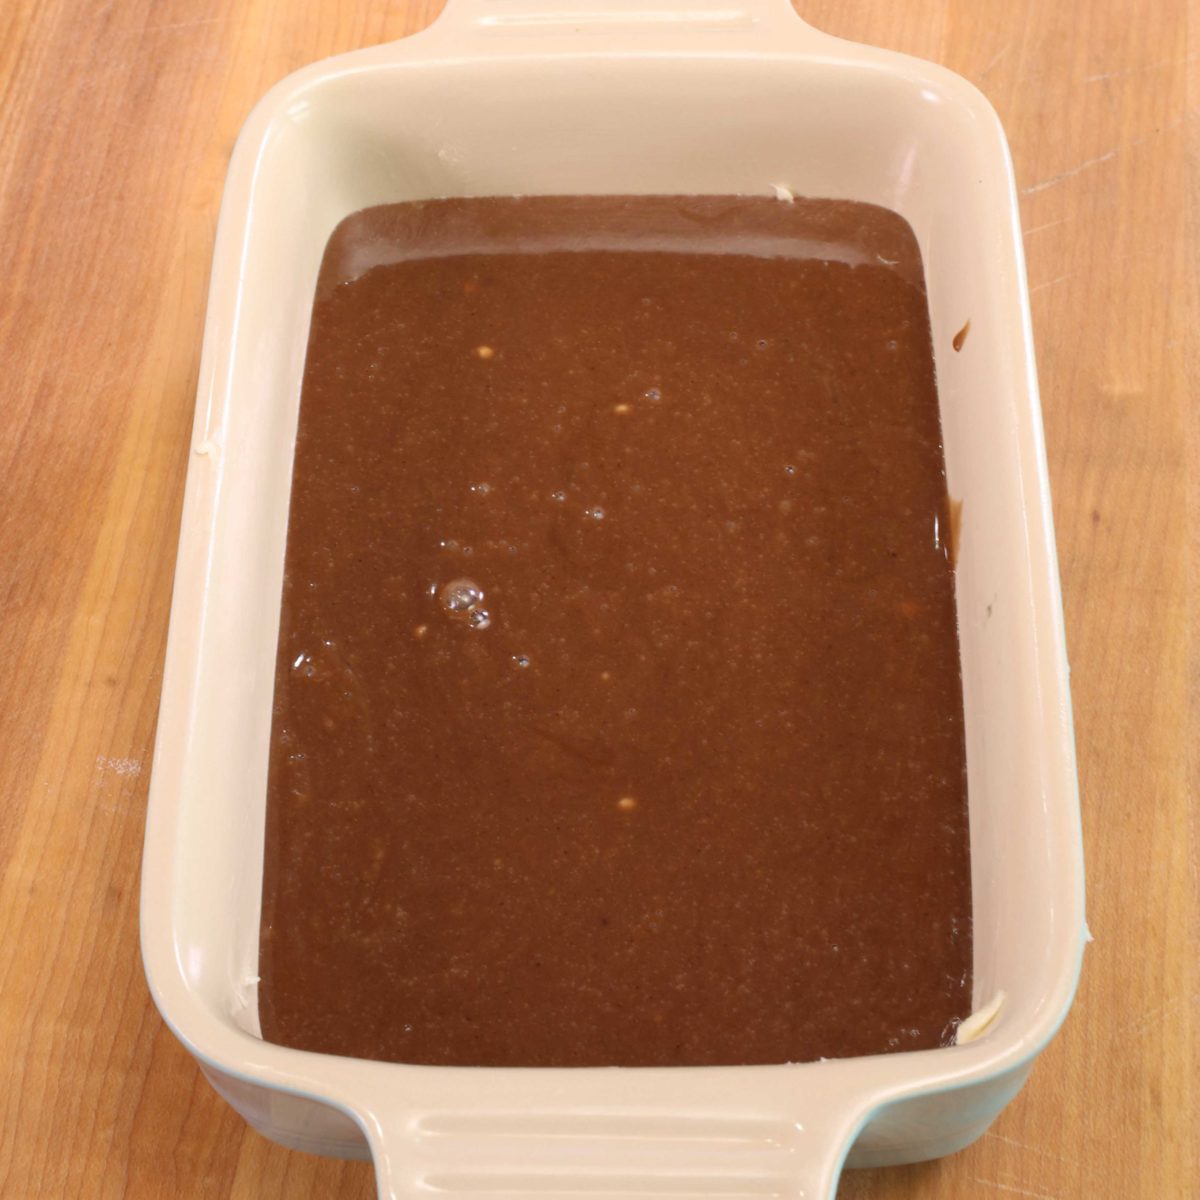 chocolate cake batter in a 5x7 inch baking dish.